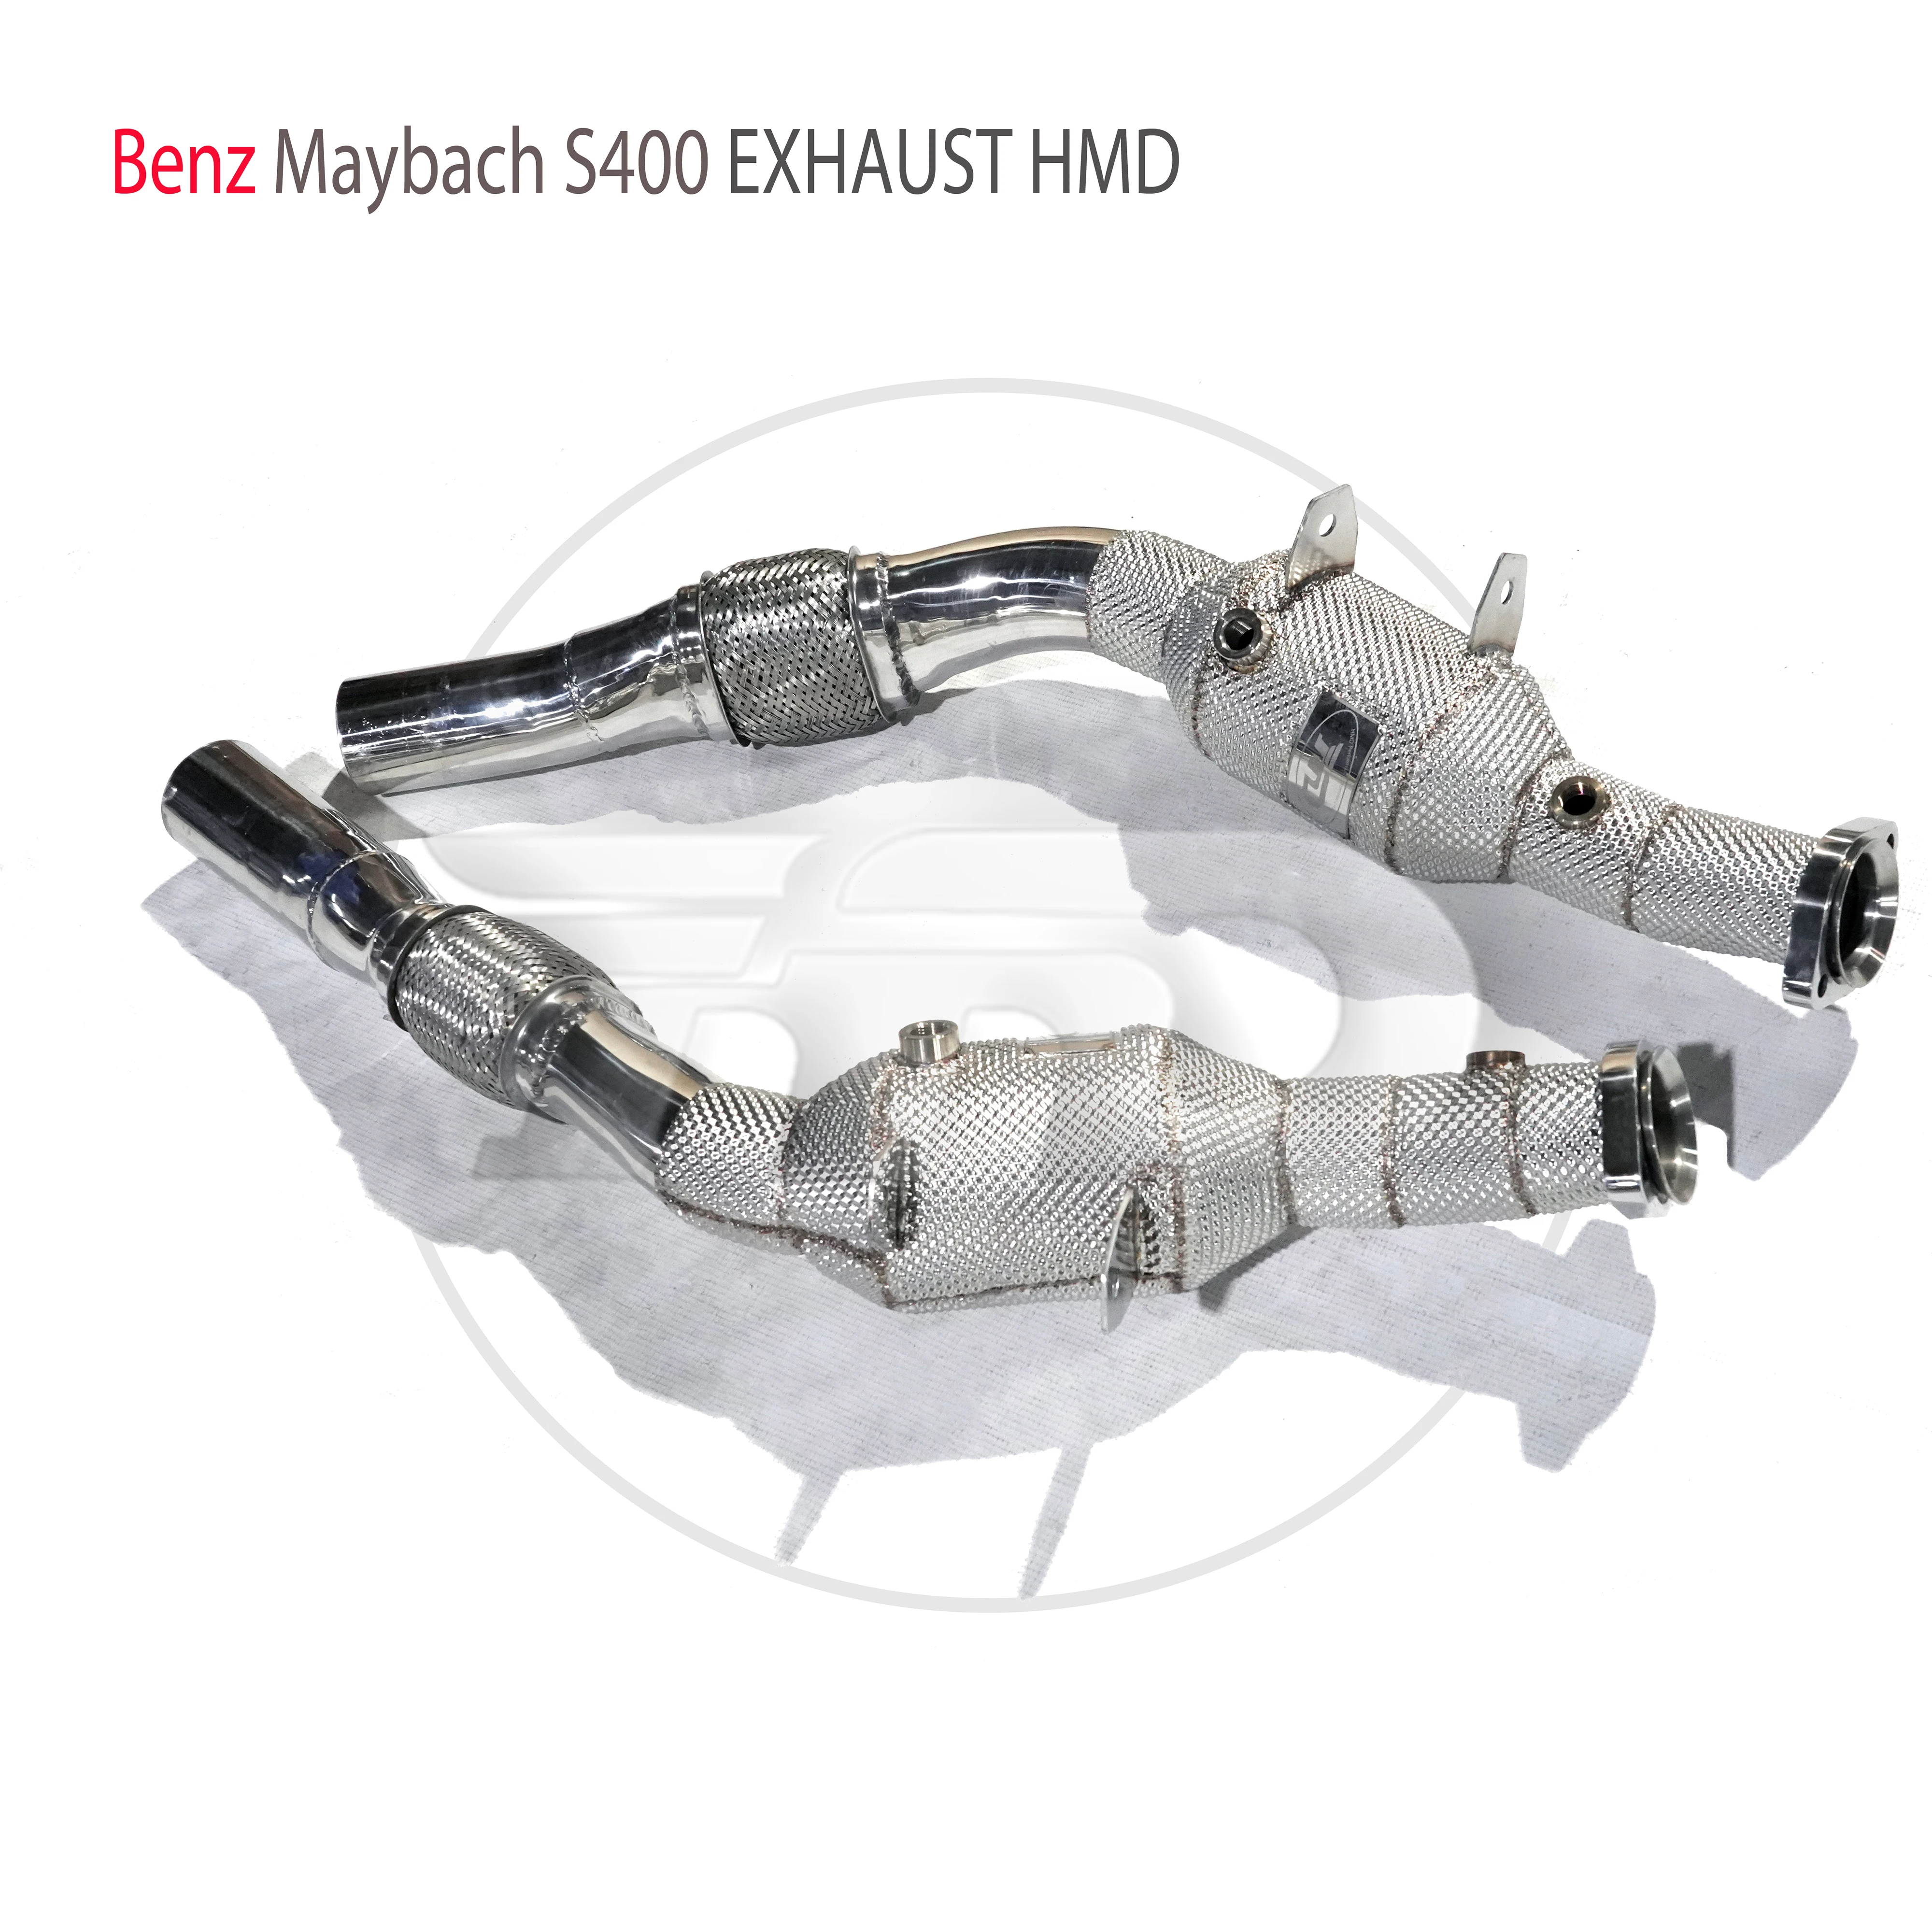 

HMD Exhaust Manifold High Flow Downpipe for Mercedes Benz S400 Car Accessories With Catalytic Converter Header Catless Pipe